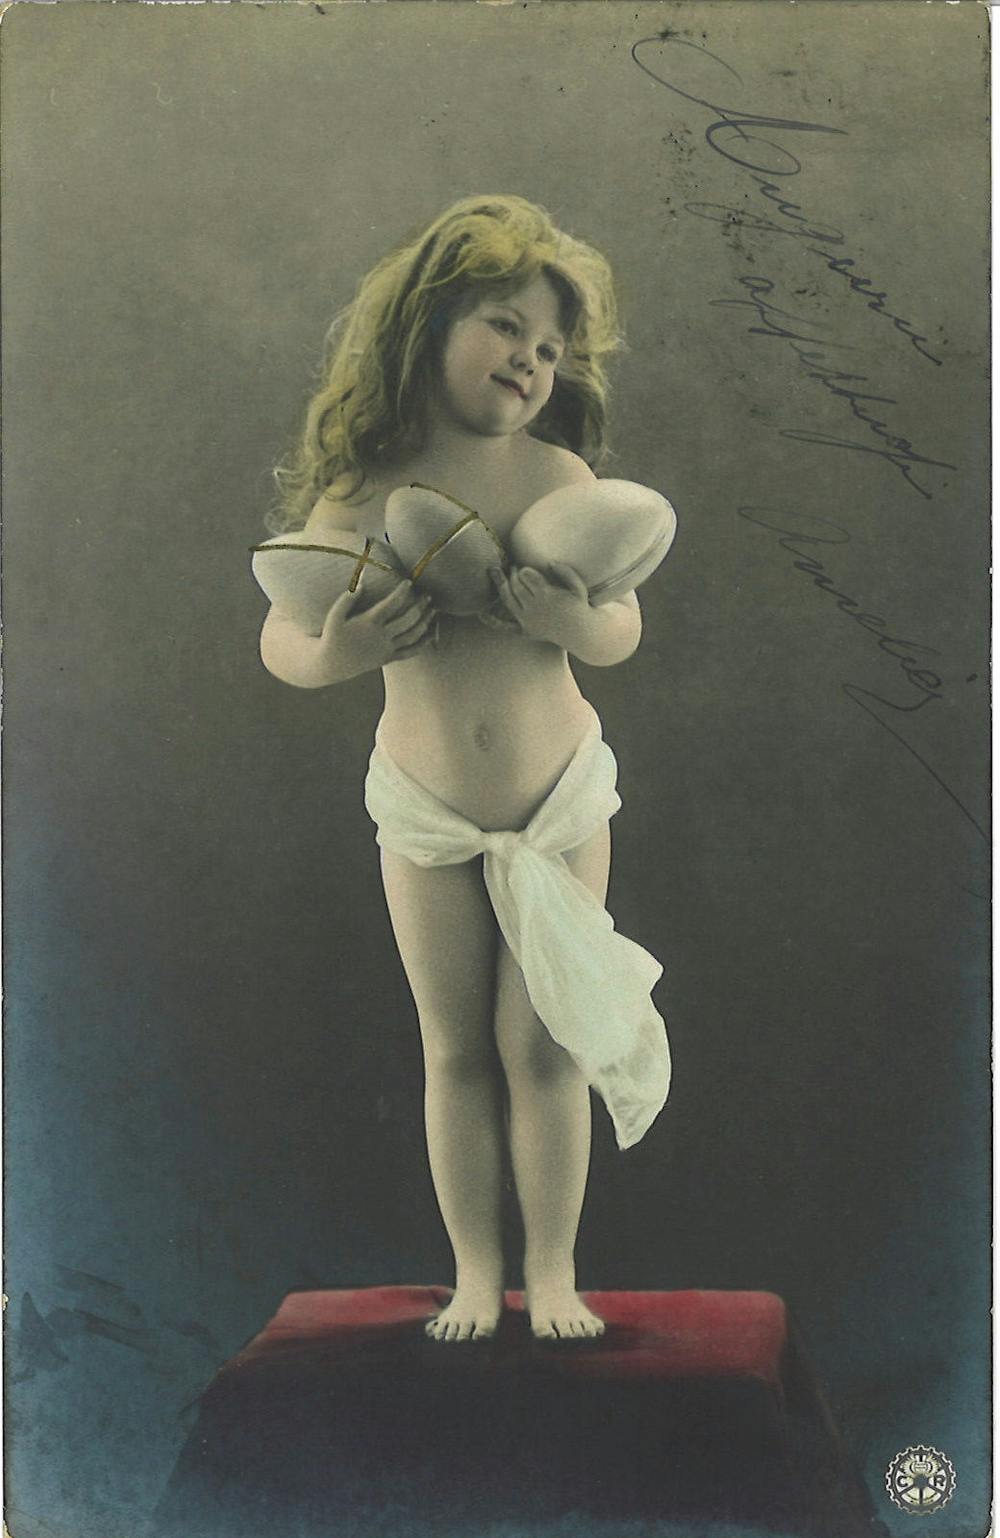 19th Century French Women - Between innocence and experience: the sexualisation of girlhood in 19th  century postcards